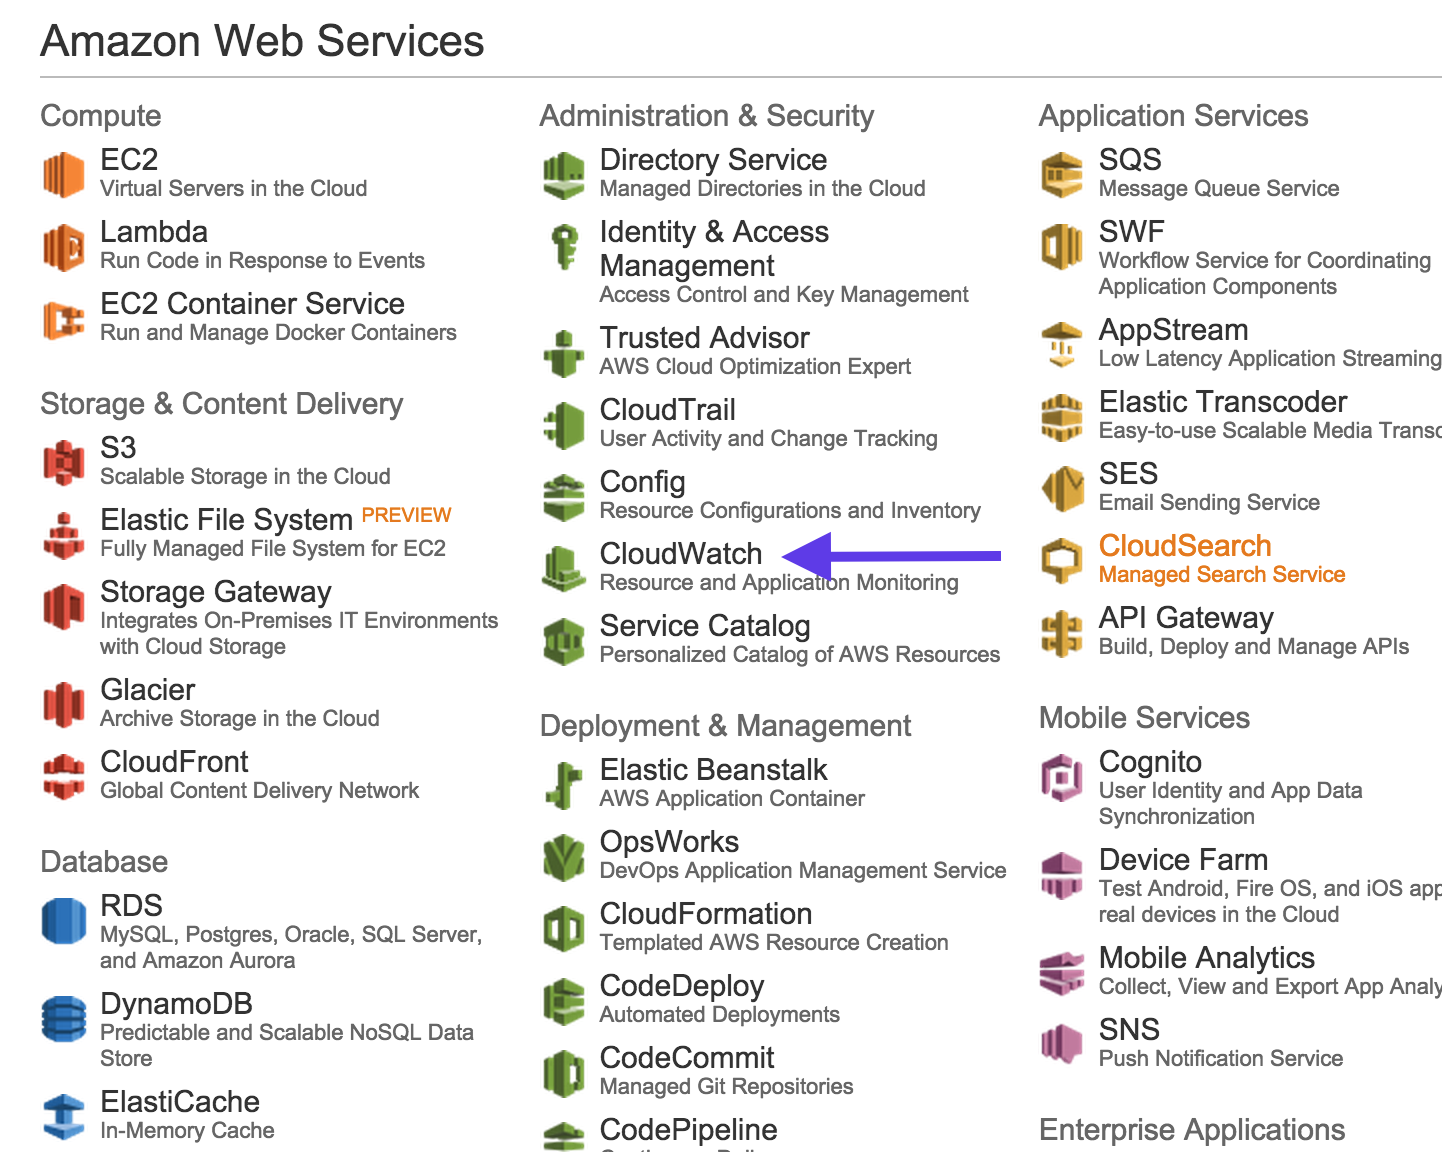 An image showing the location of CloudWatch in Amazon web services platform.